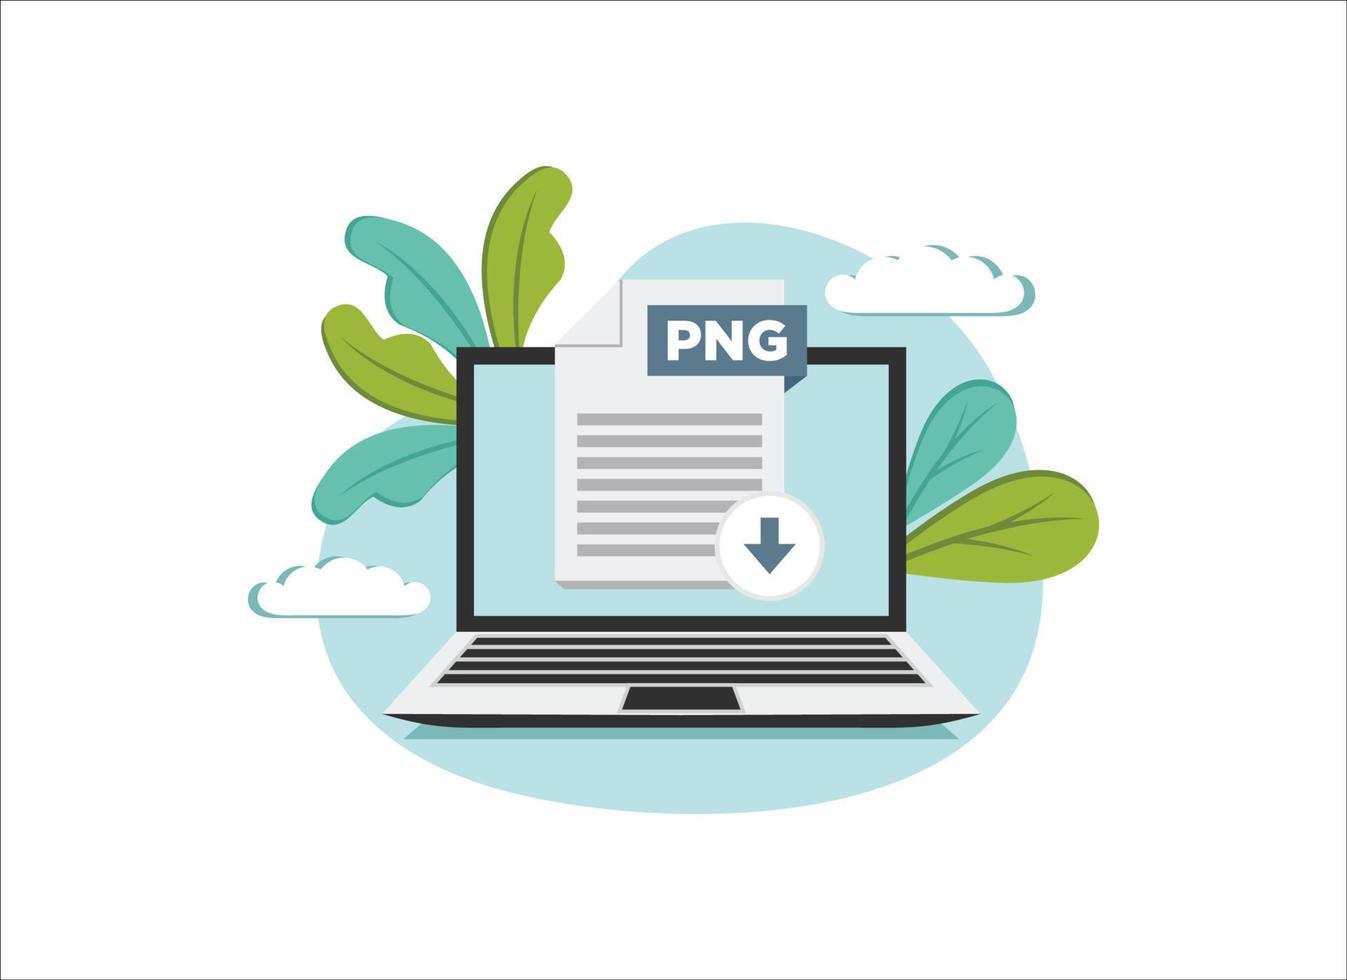 Download pntg icon file with label on laptop screen. Downloading document concept vector